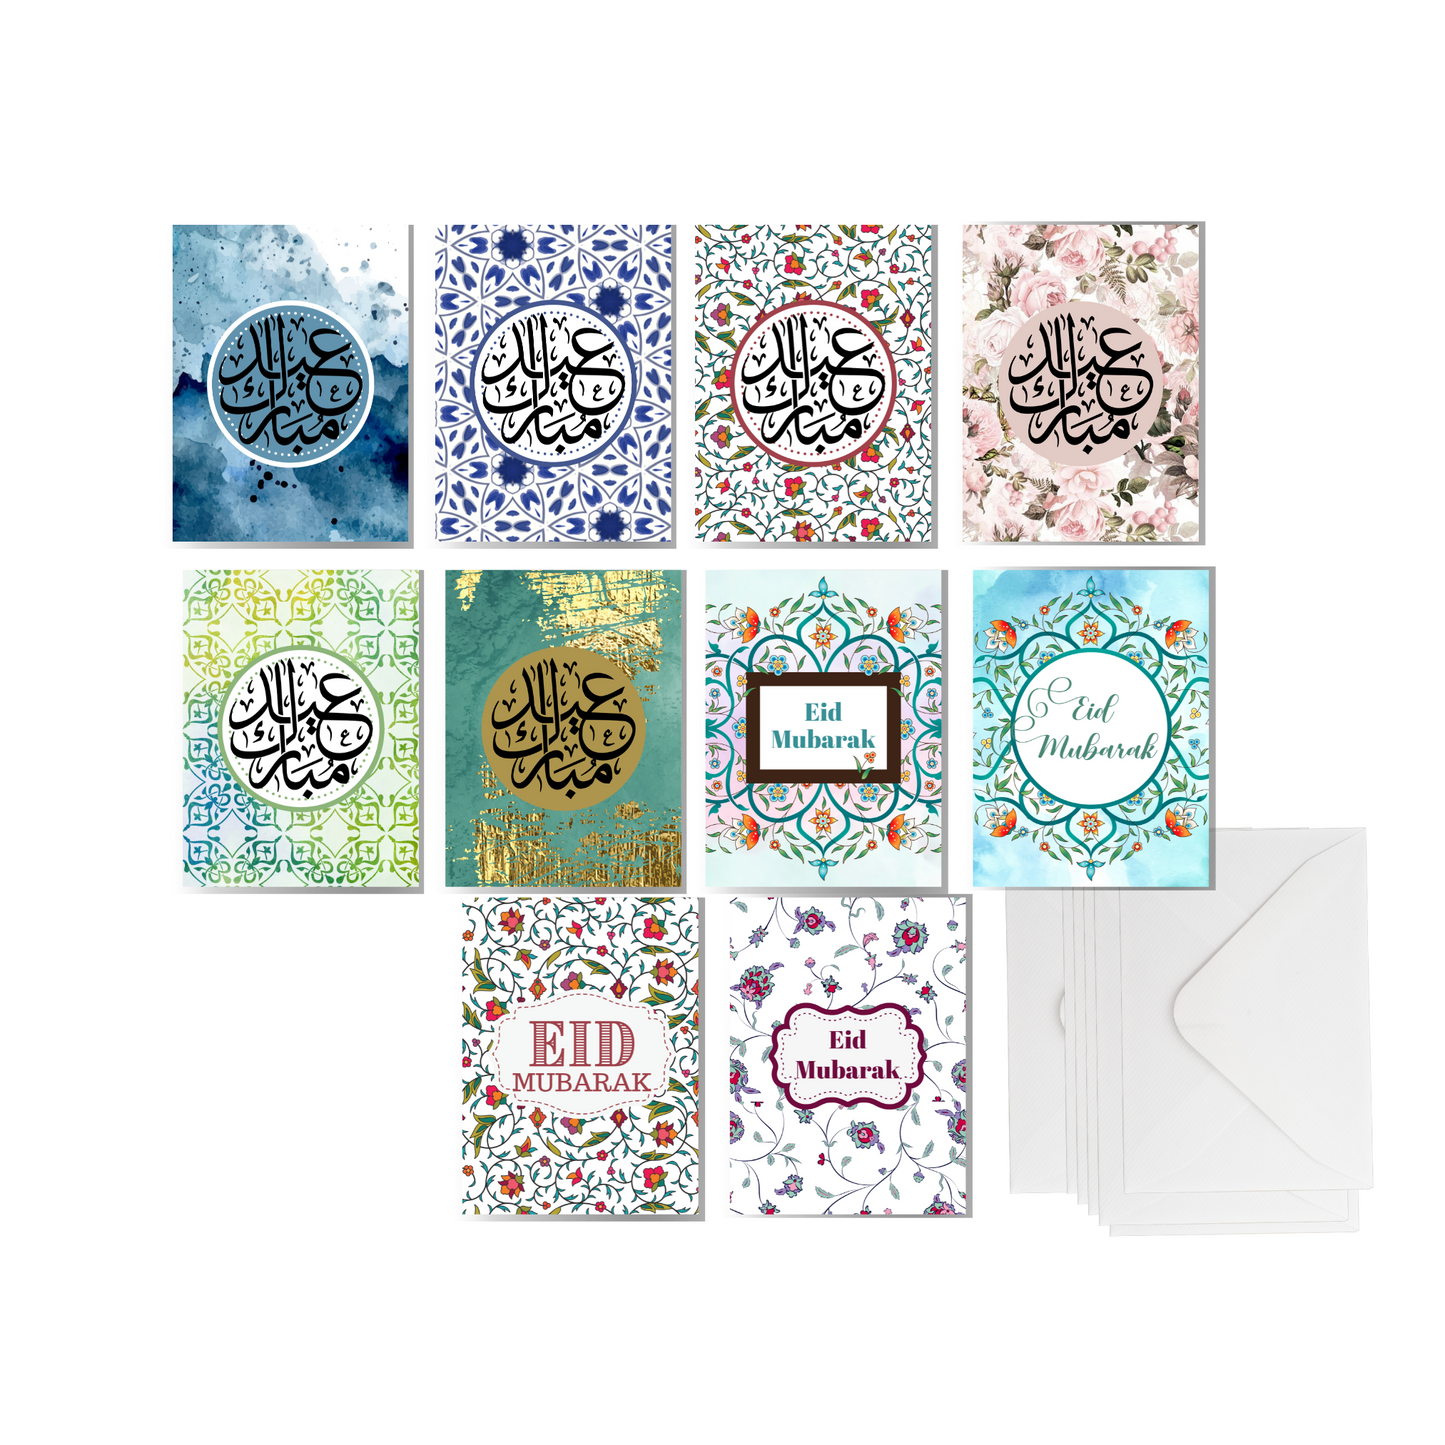 Bulk packet with 10 different Eid cards in A6 size, Eid cards with envelopes with inside blank, Perfect for Eid, Eid cards